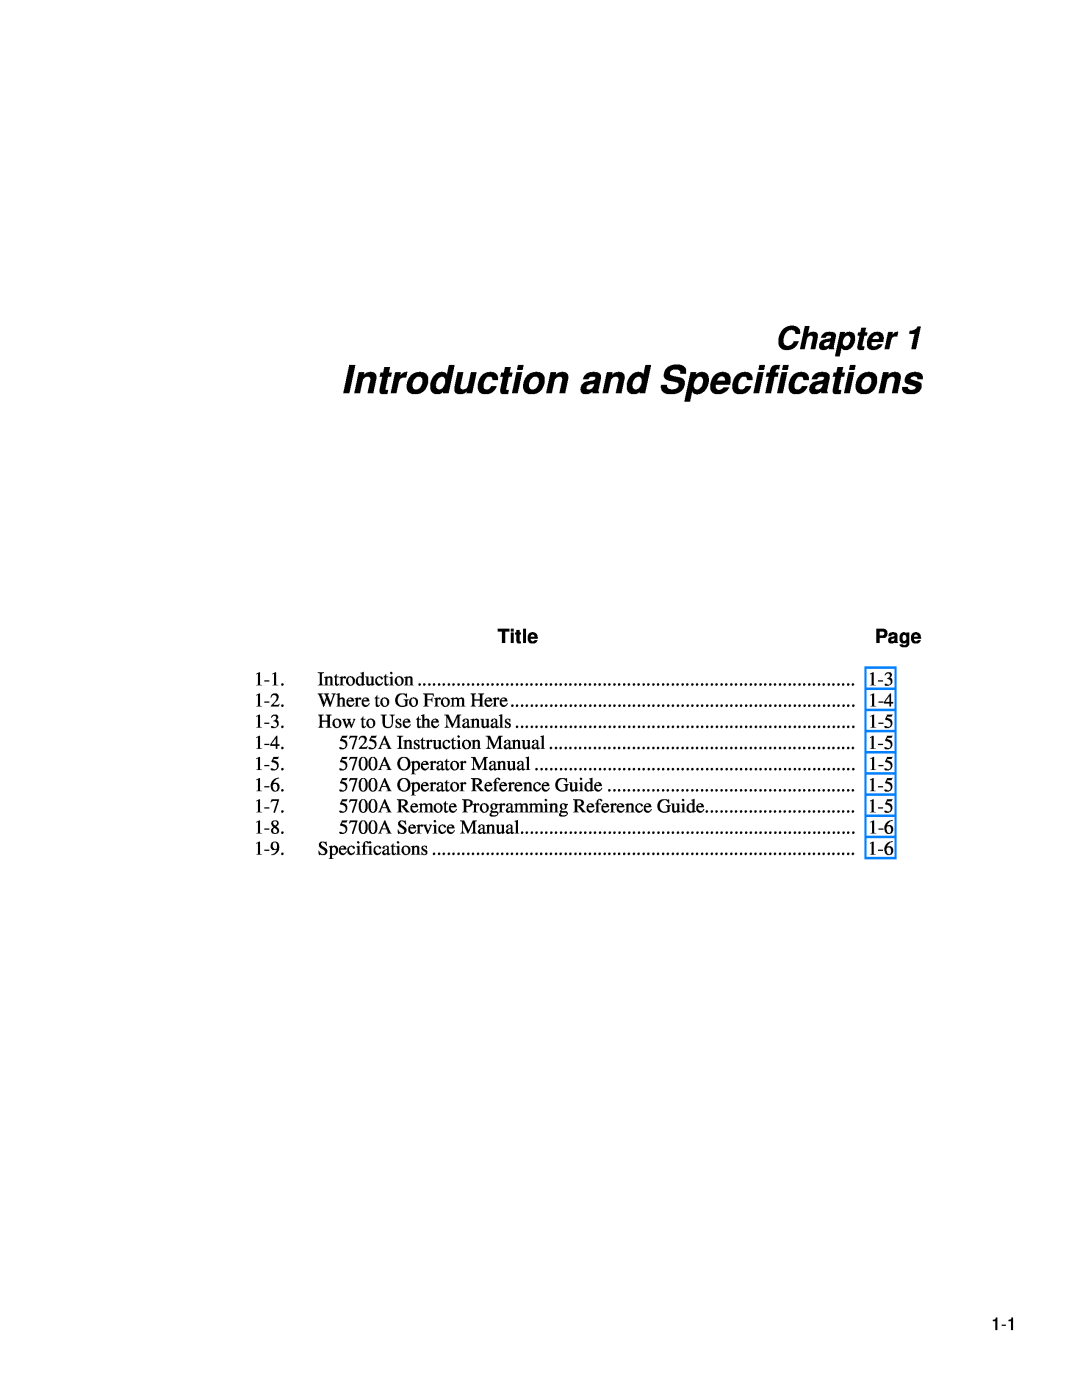 Fluke 5725A instruction manual Introduction and Specifications, Chapter 